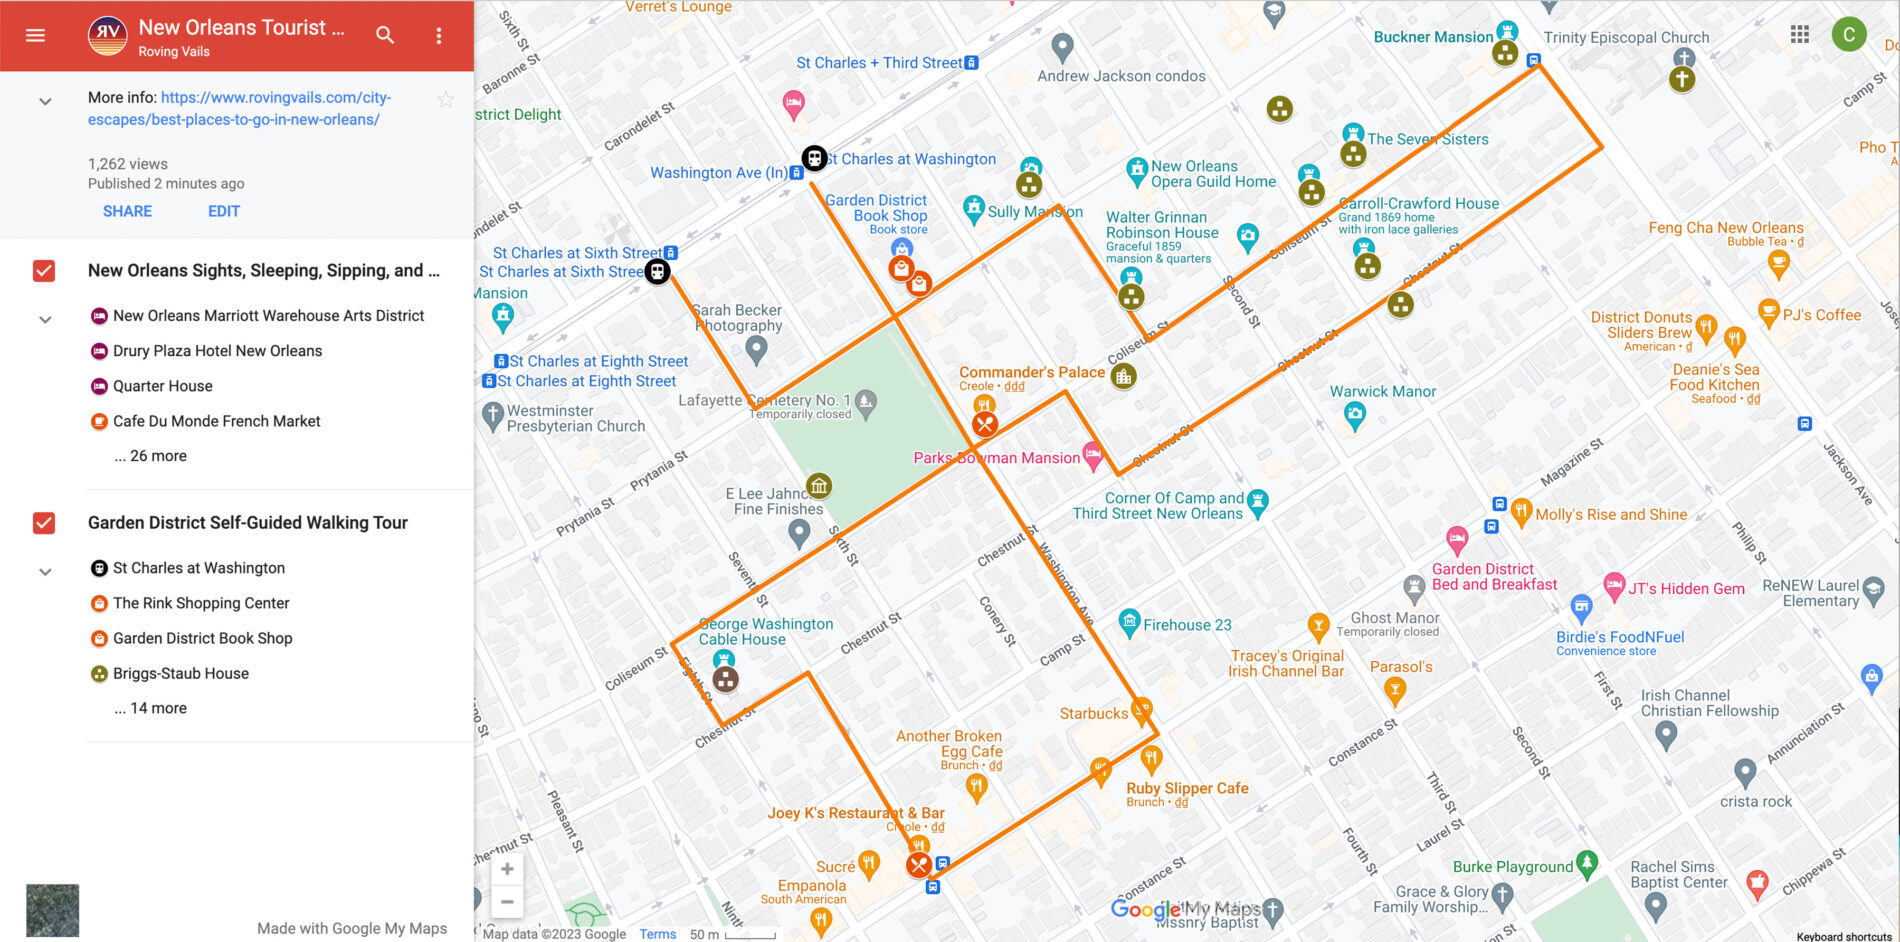 New Orleans Garden District Self Guided Walking Tour Map.